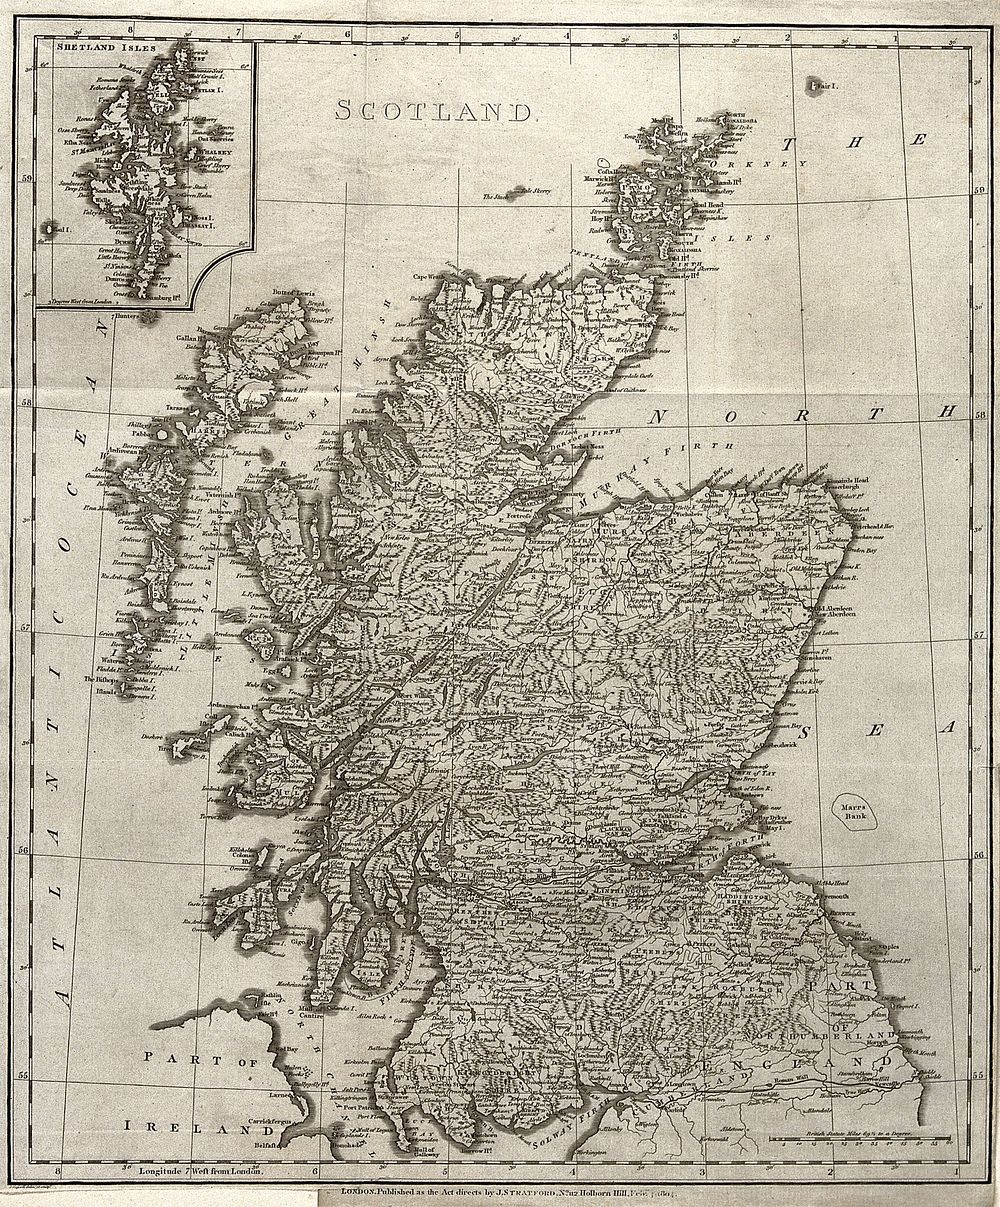 Map of Scotland. Engraving by J. Russell, 1804.